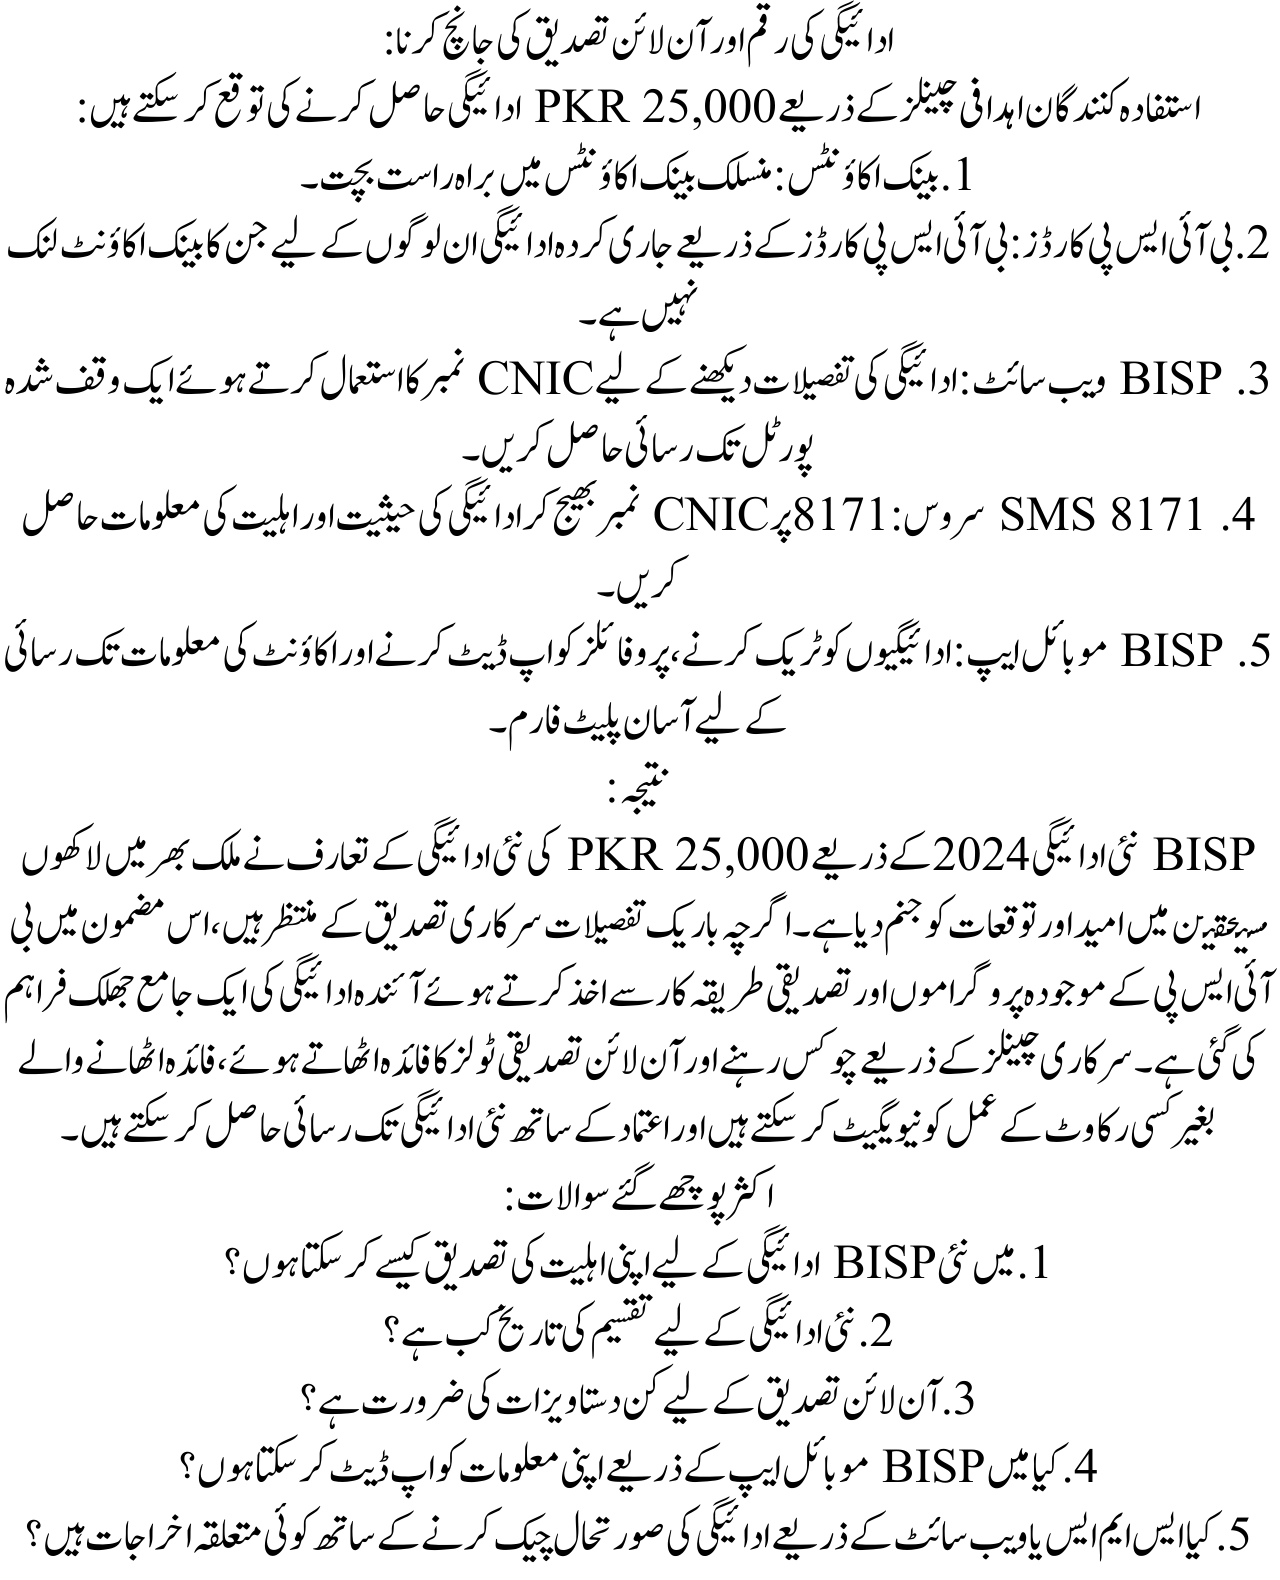 BISP New Payment 2024: Eligibility, Amount, and Online Verification Updates